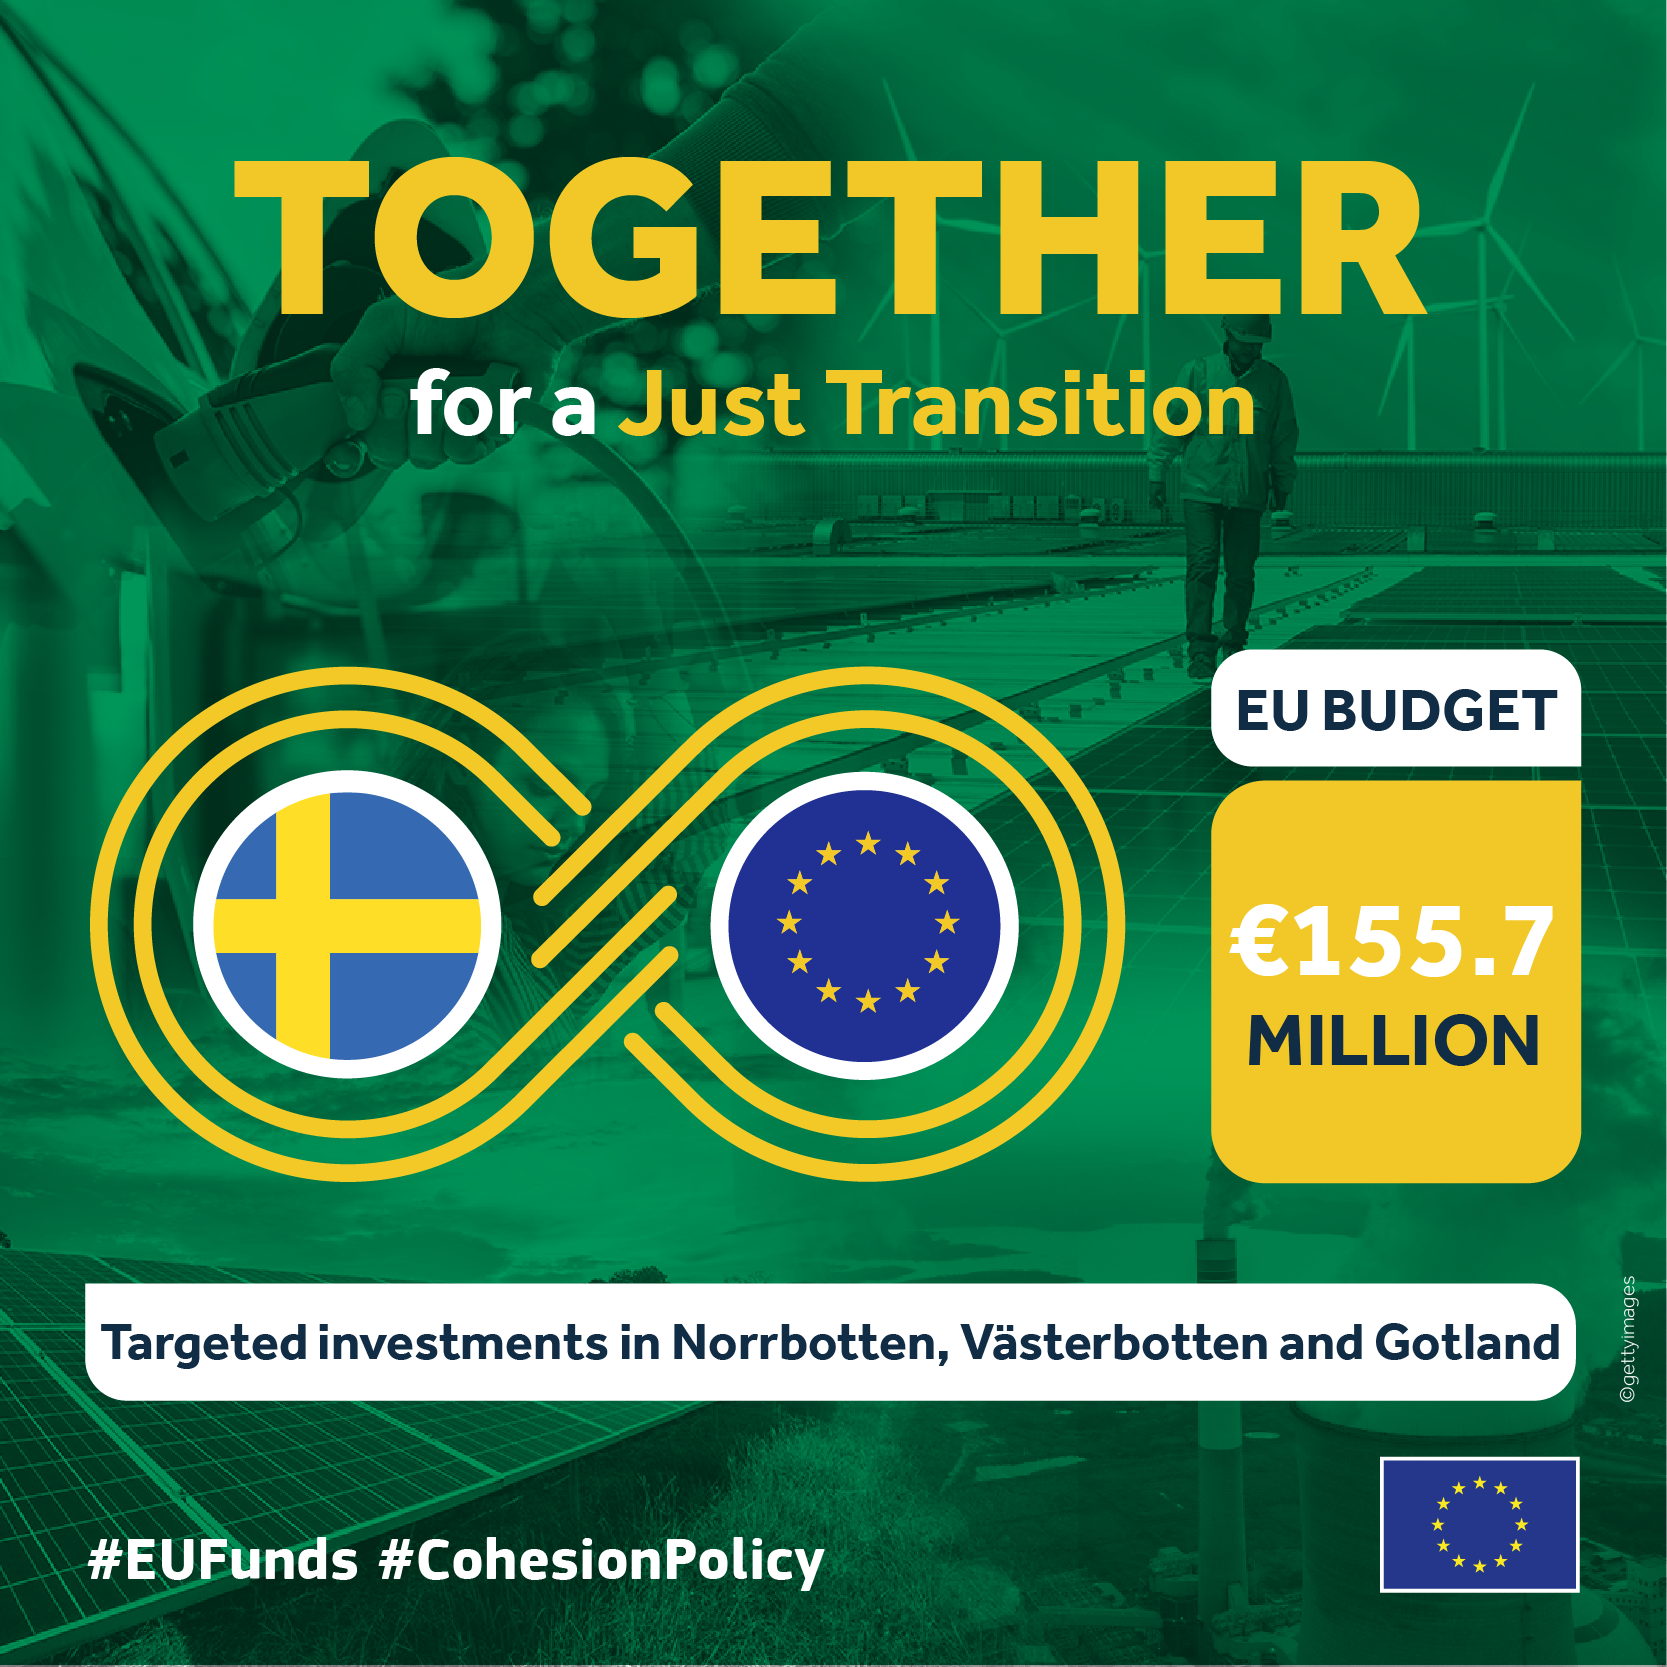 EU Cohesion Policy: €155.7 million for a just climate transition in Sweden